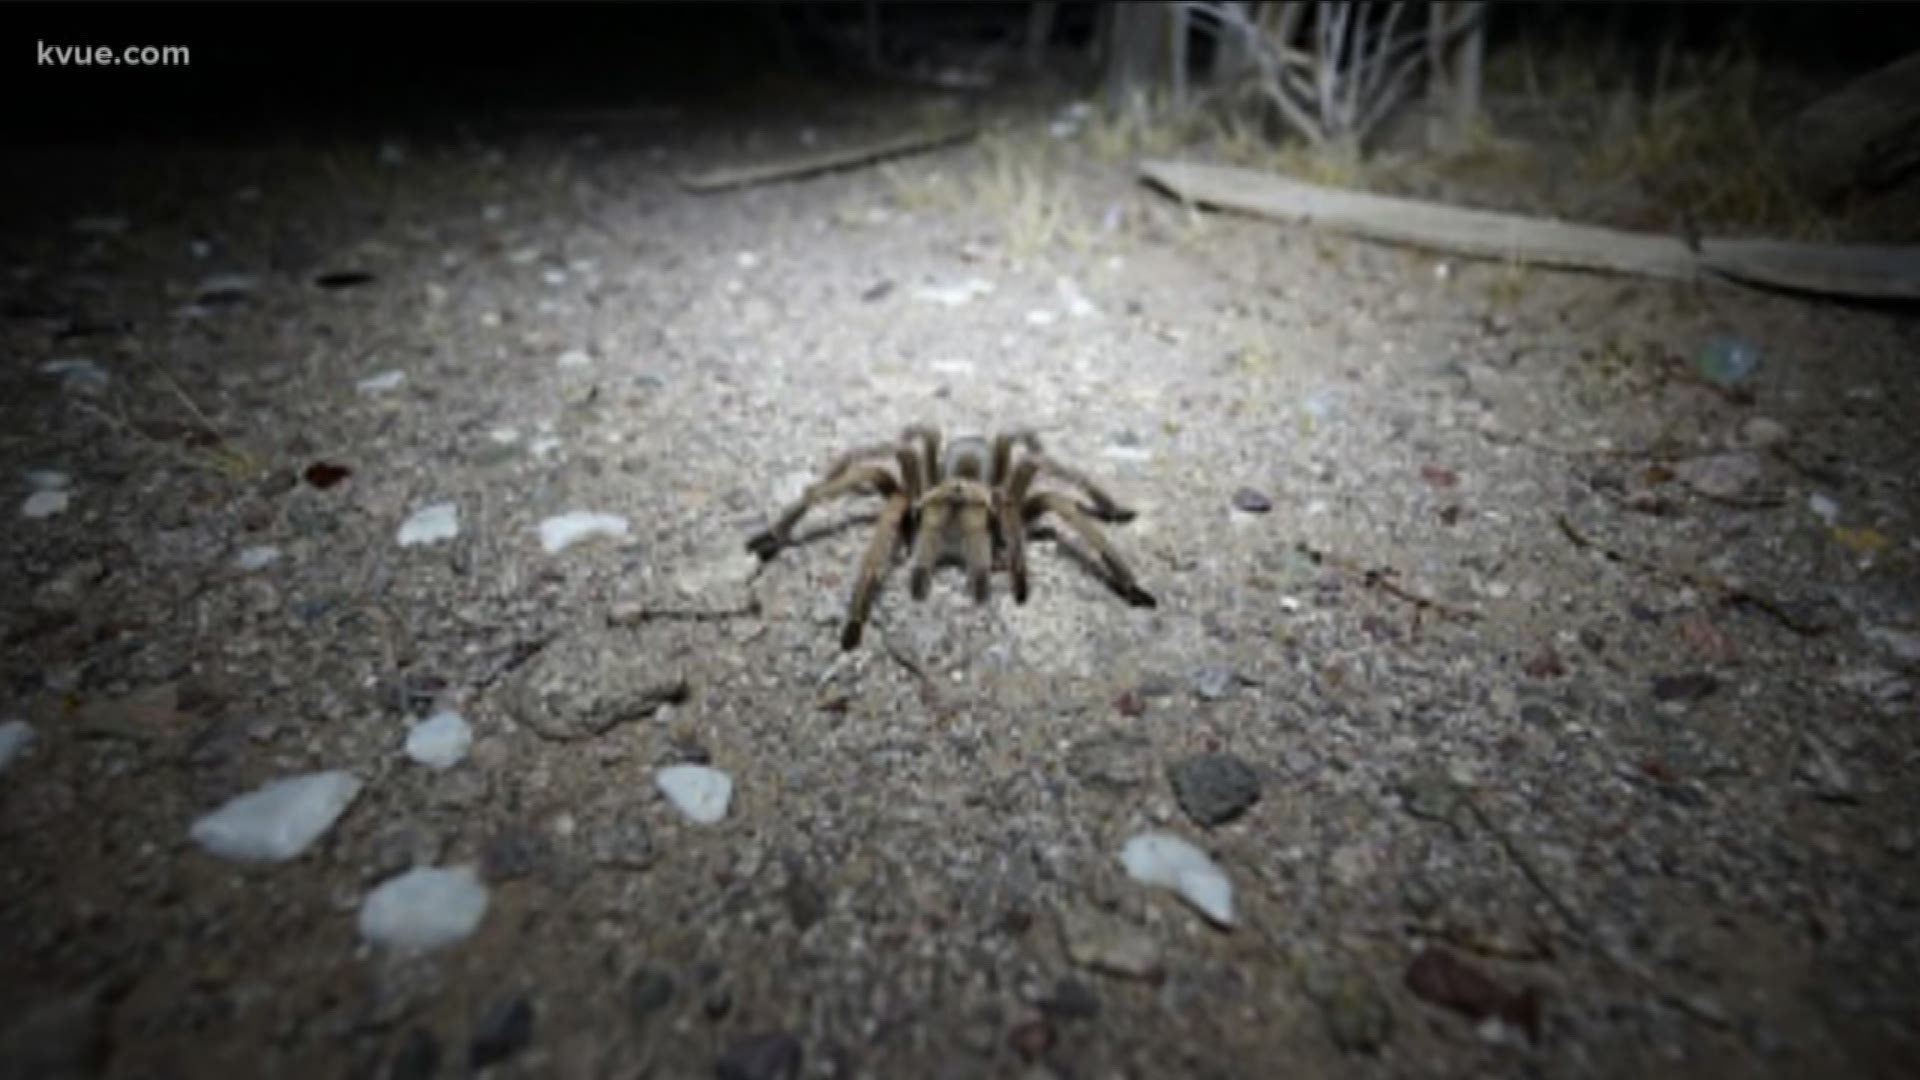 Be sure to watch your step at the Barton Creek Greenbelt! The trail is home to fist-sized tarantulas.